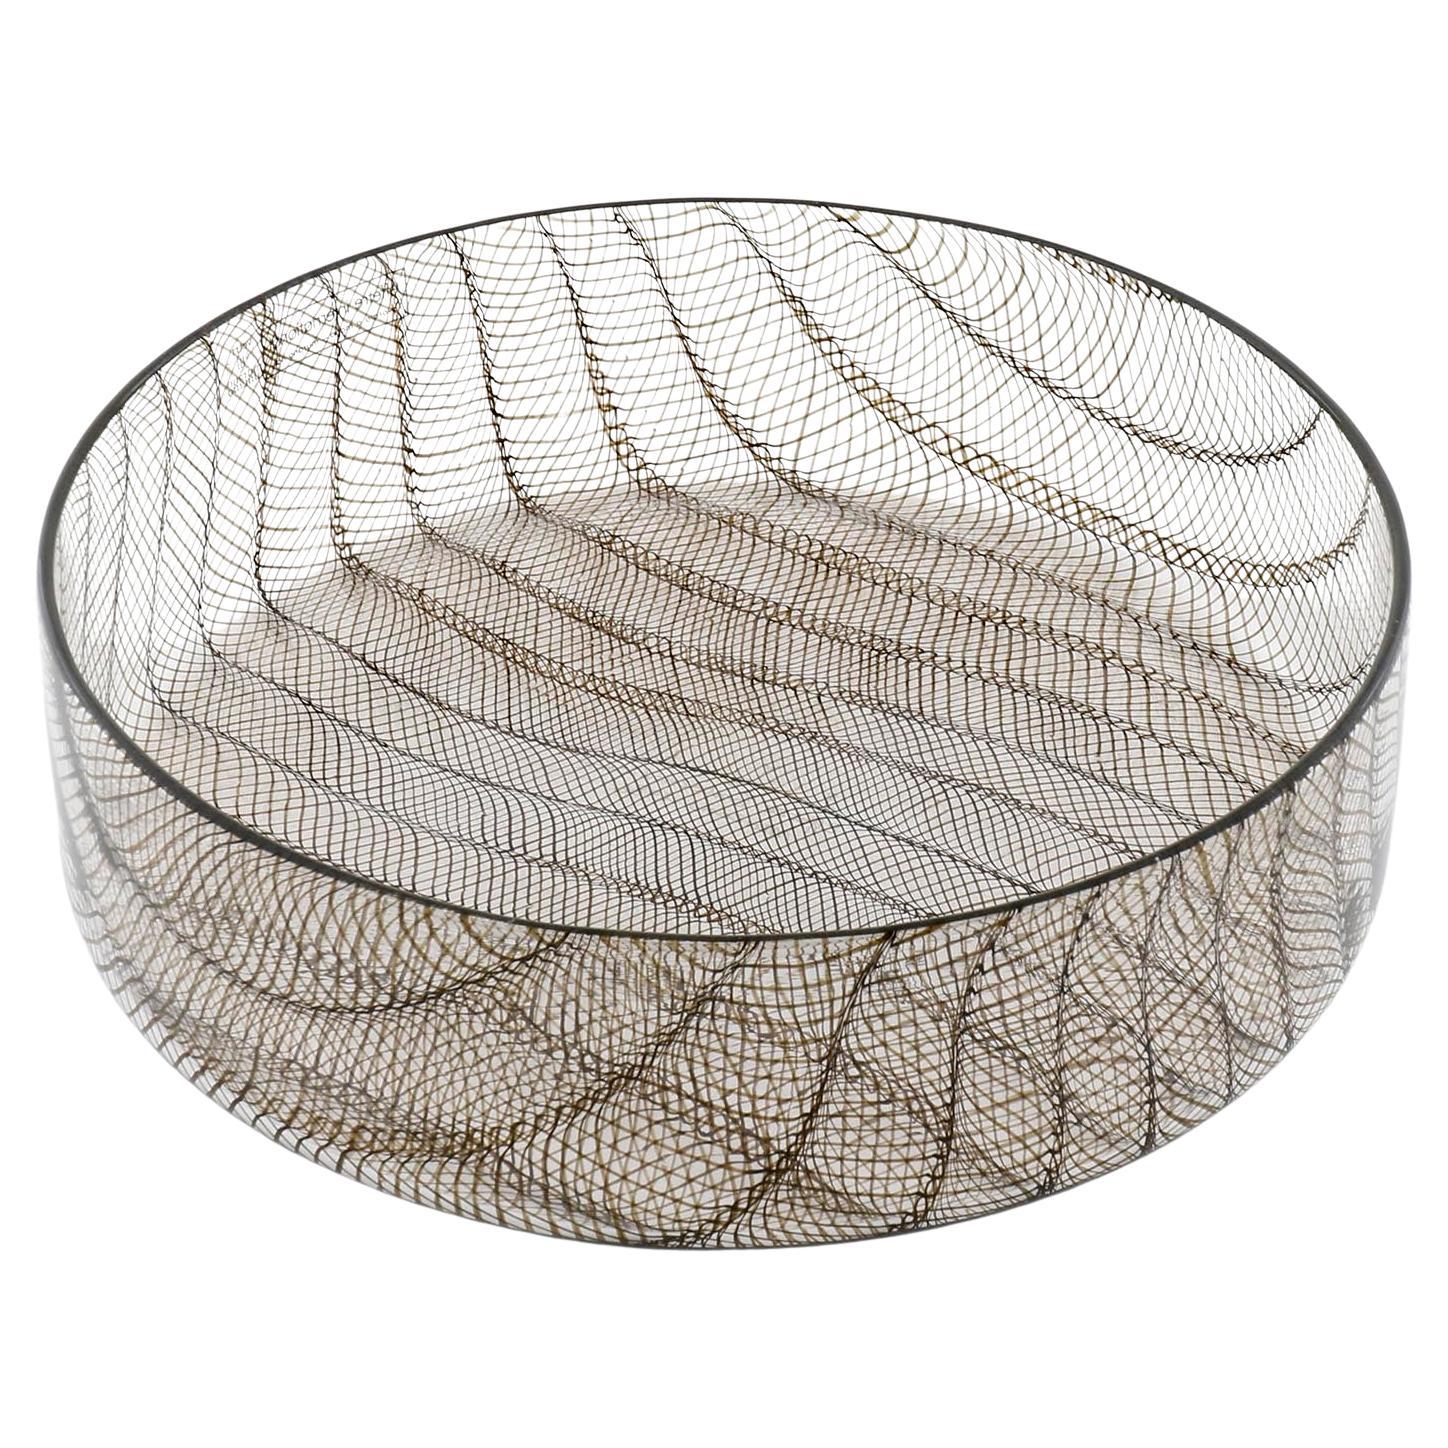 Glass Bowl by Lino Tagliapietra for Effetre, Clear Sepia Black Glass, Italy 1986 For Sale